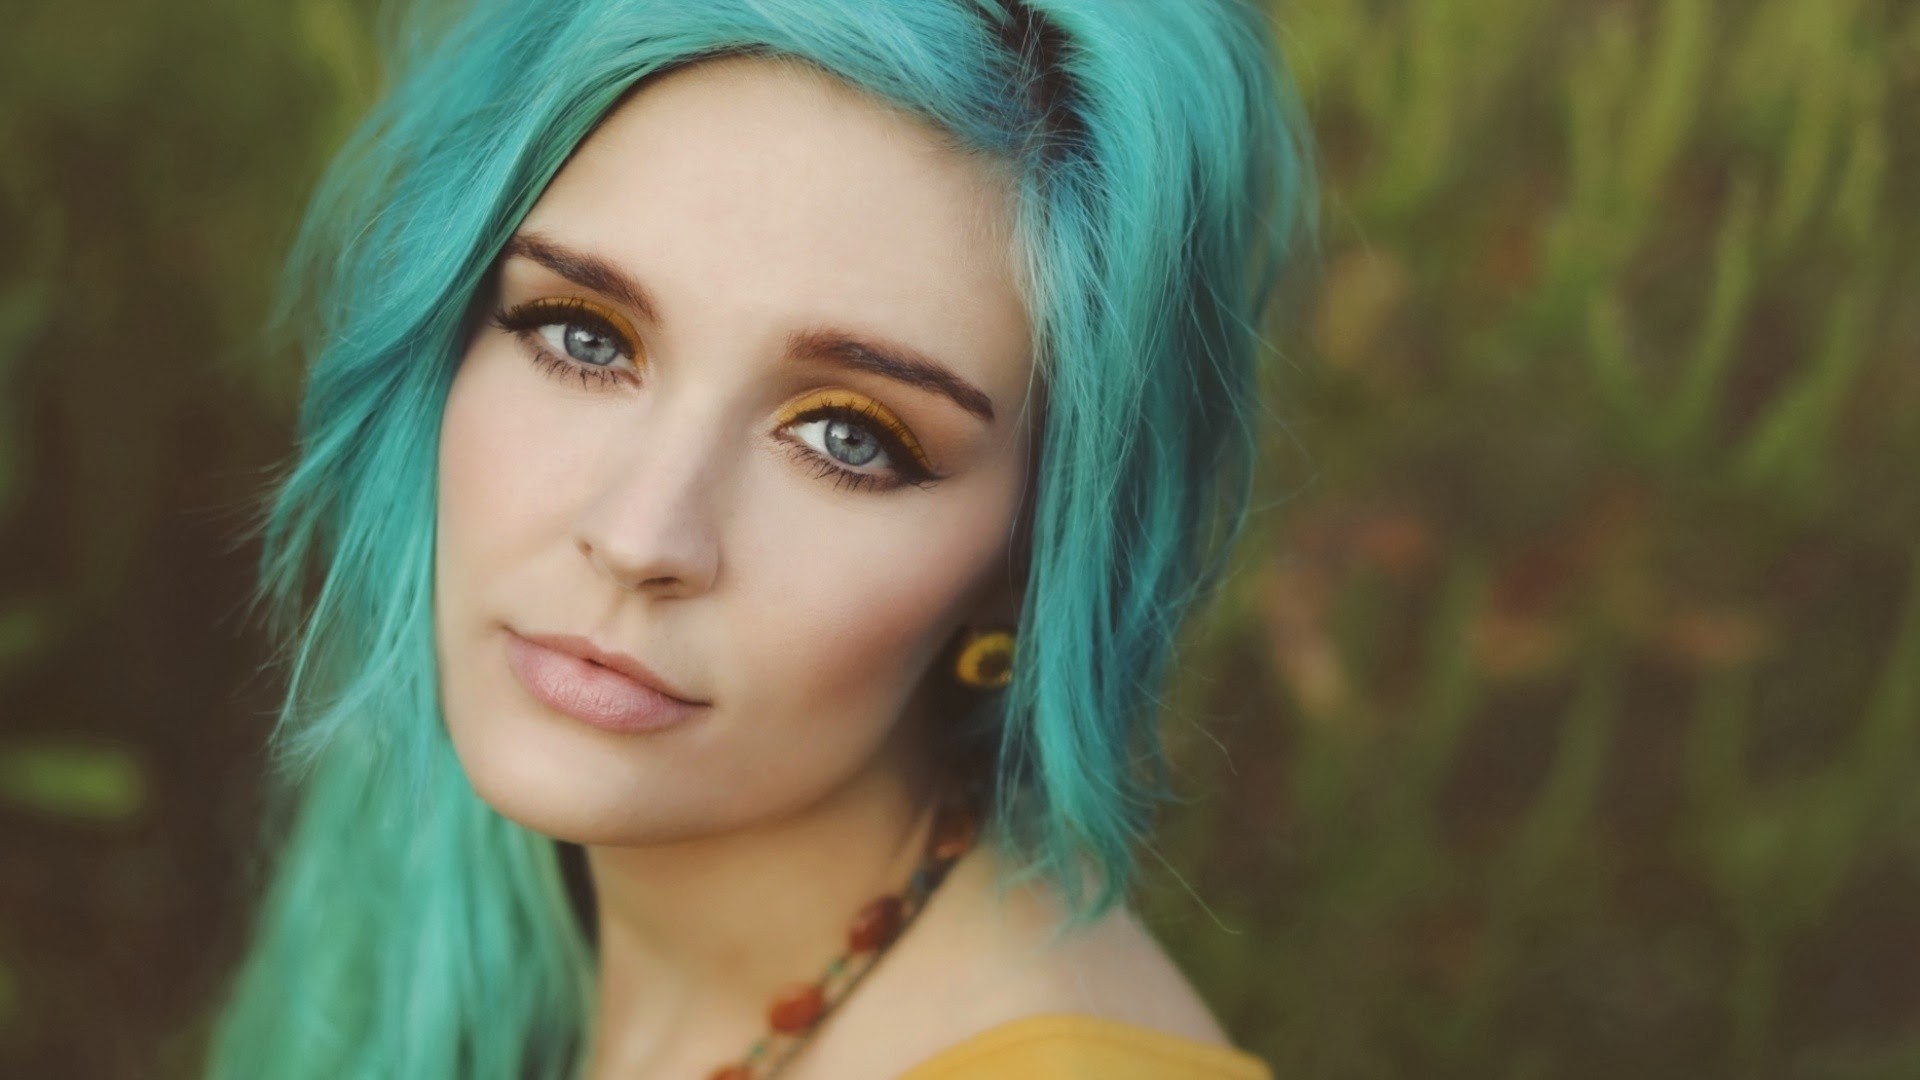 Blue Striped Hair: 10 Ways to Rock This Bold Look - wide 5